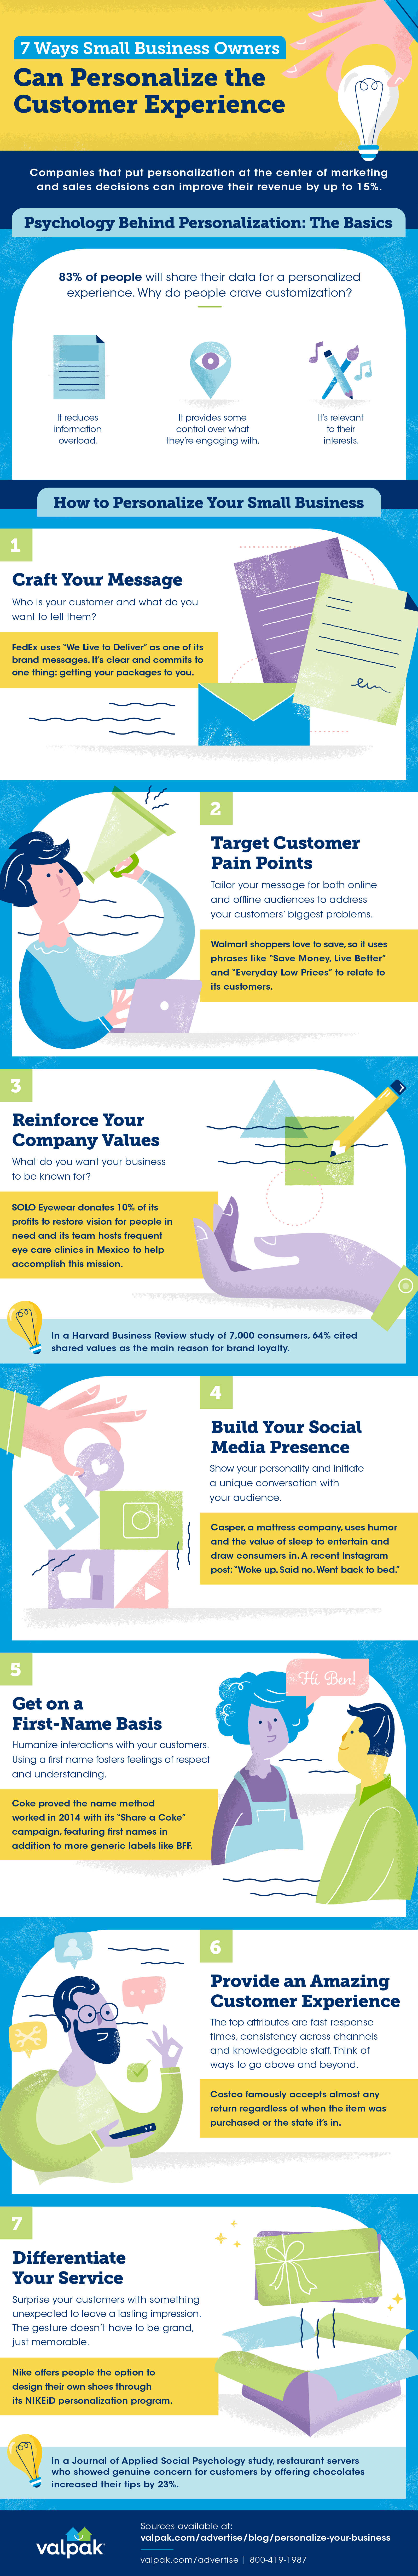 7 ways to personalize your business infographic